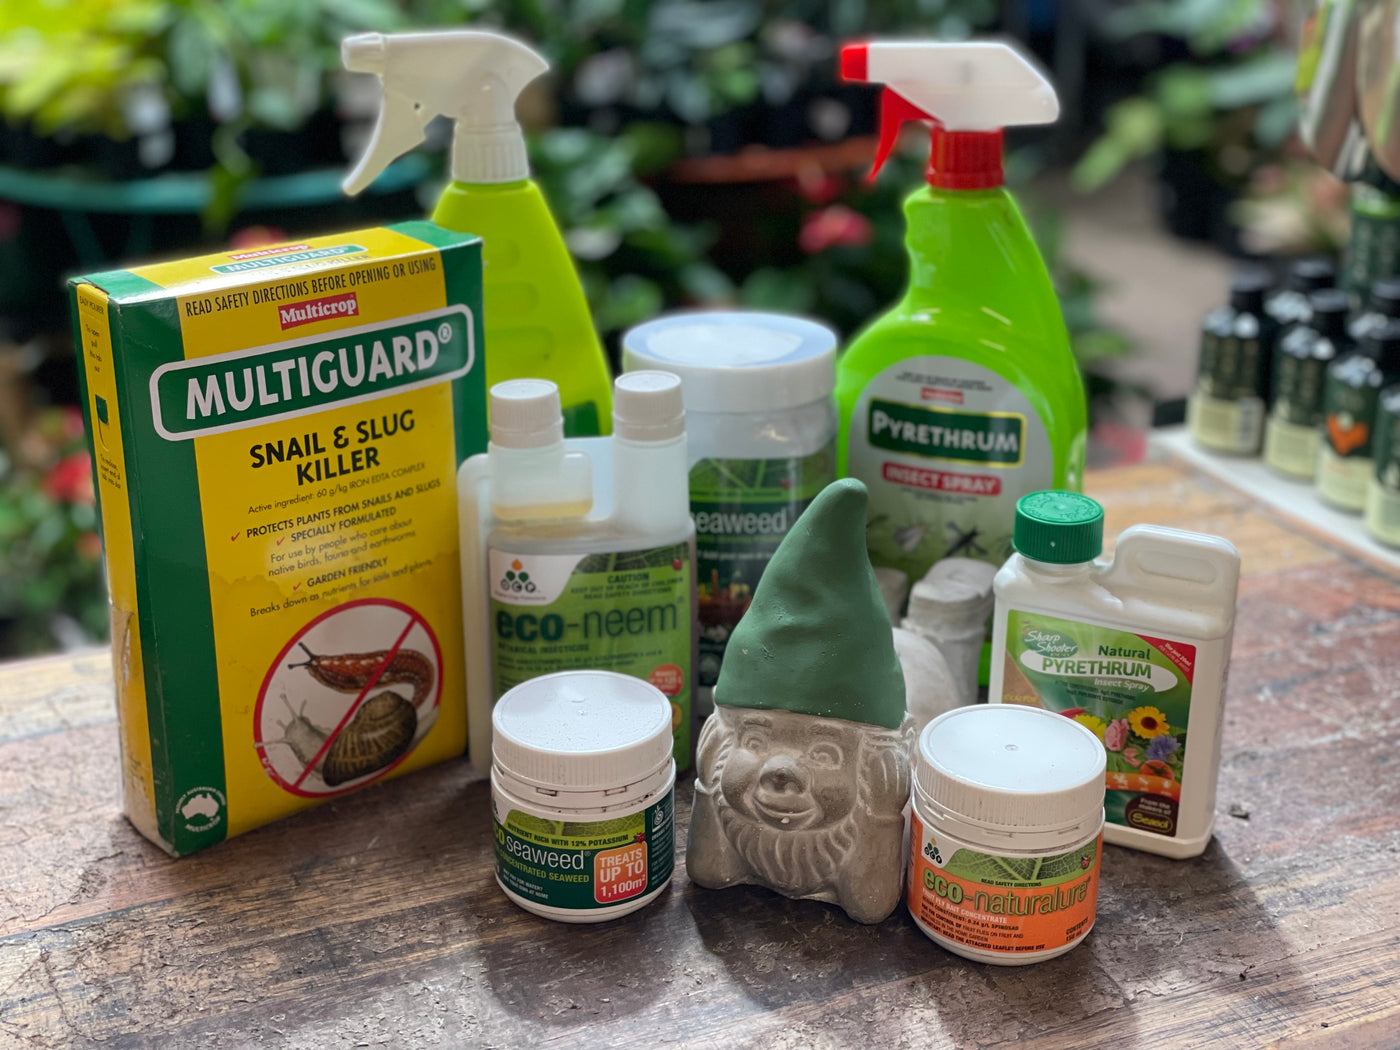 PLANT CARE PRODUCTS